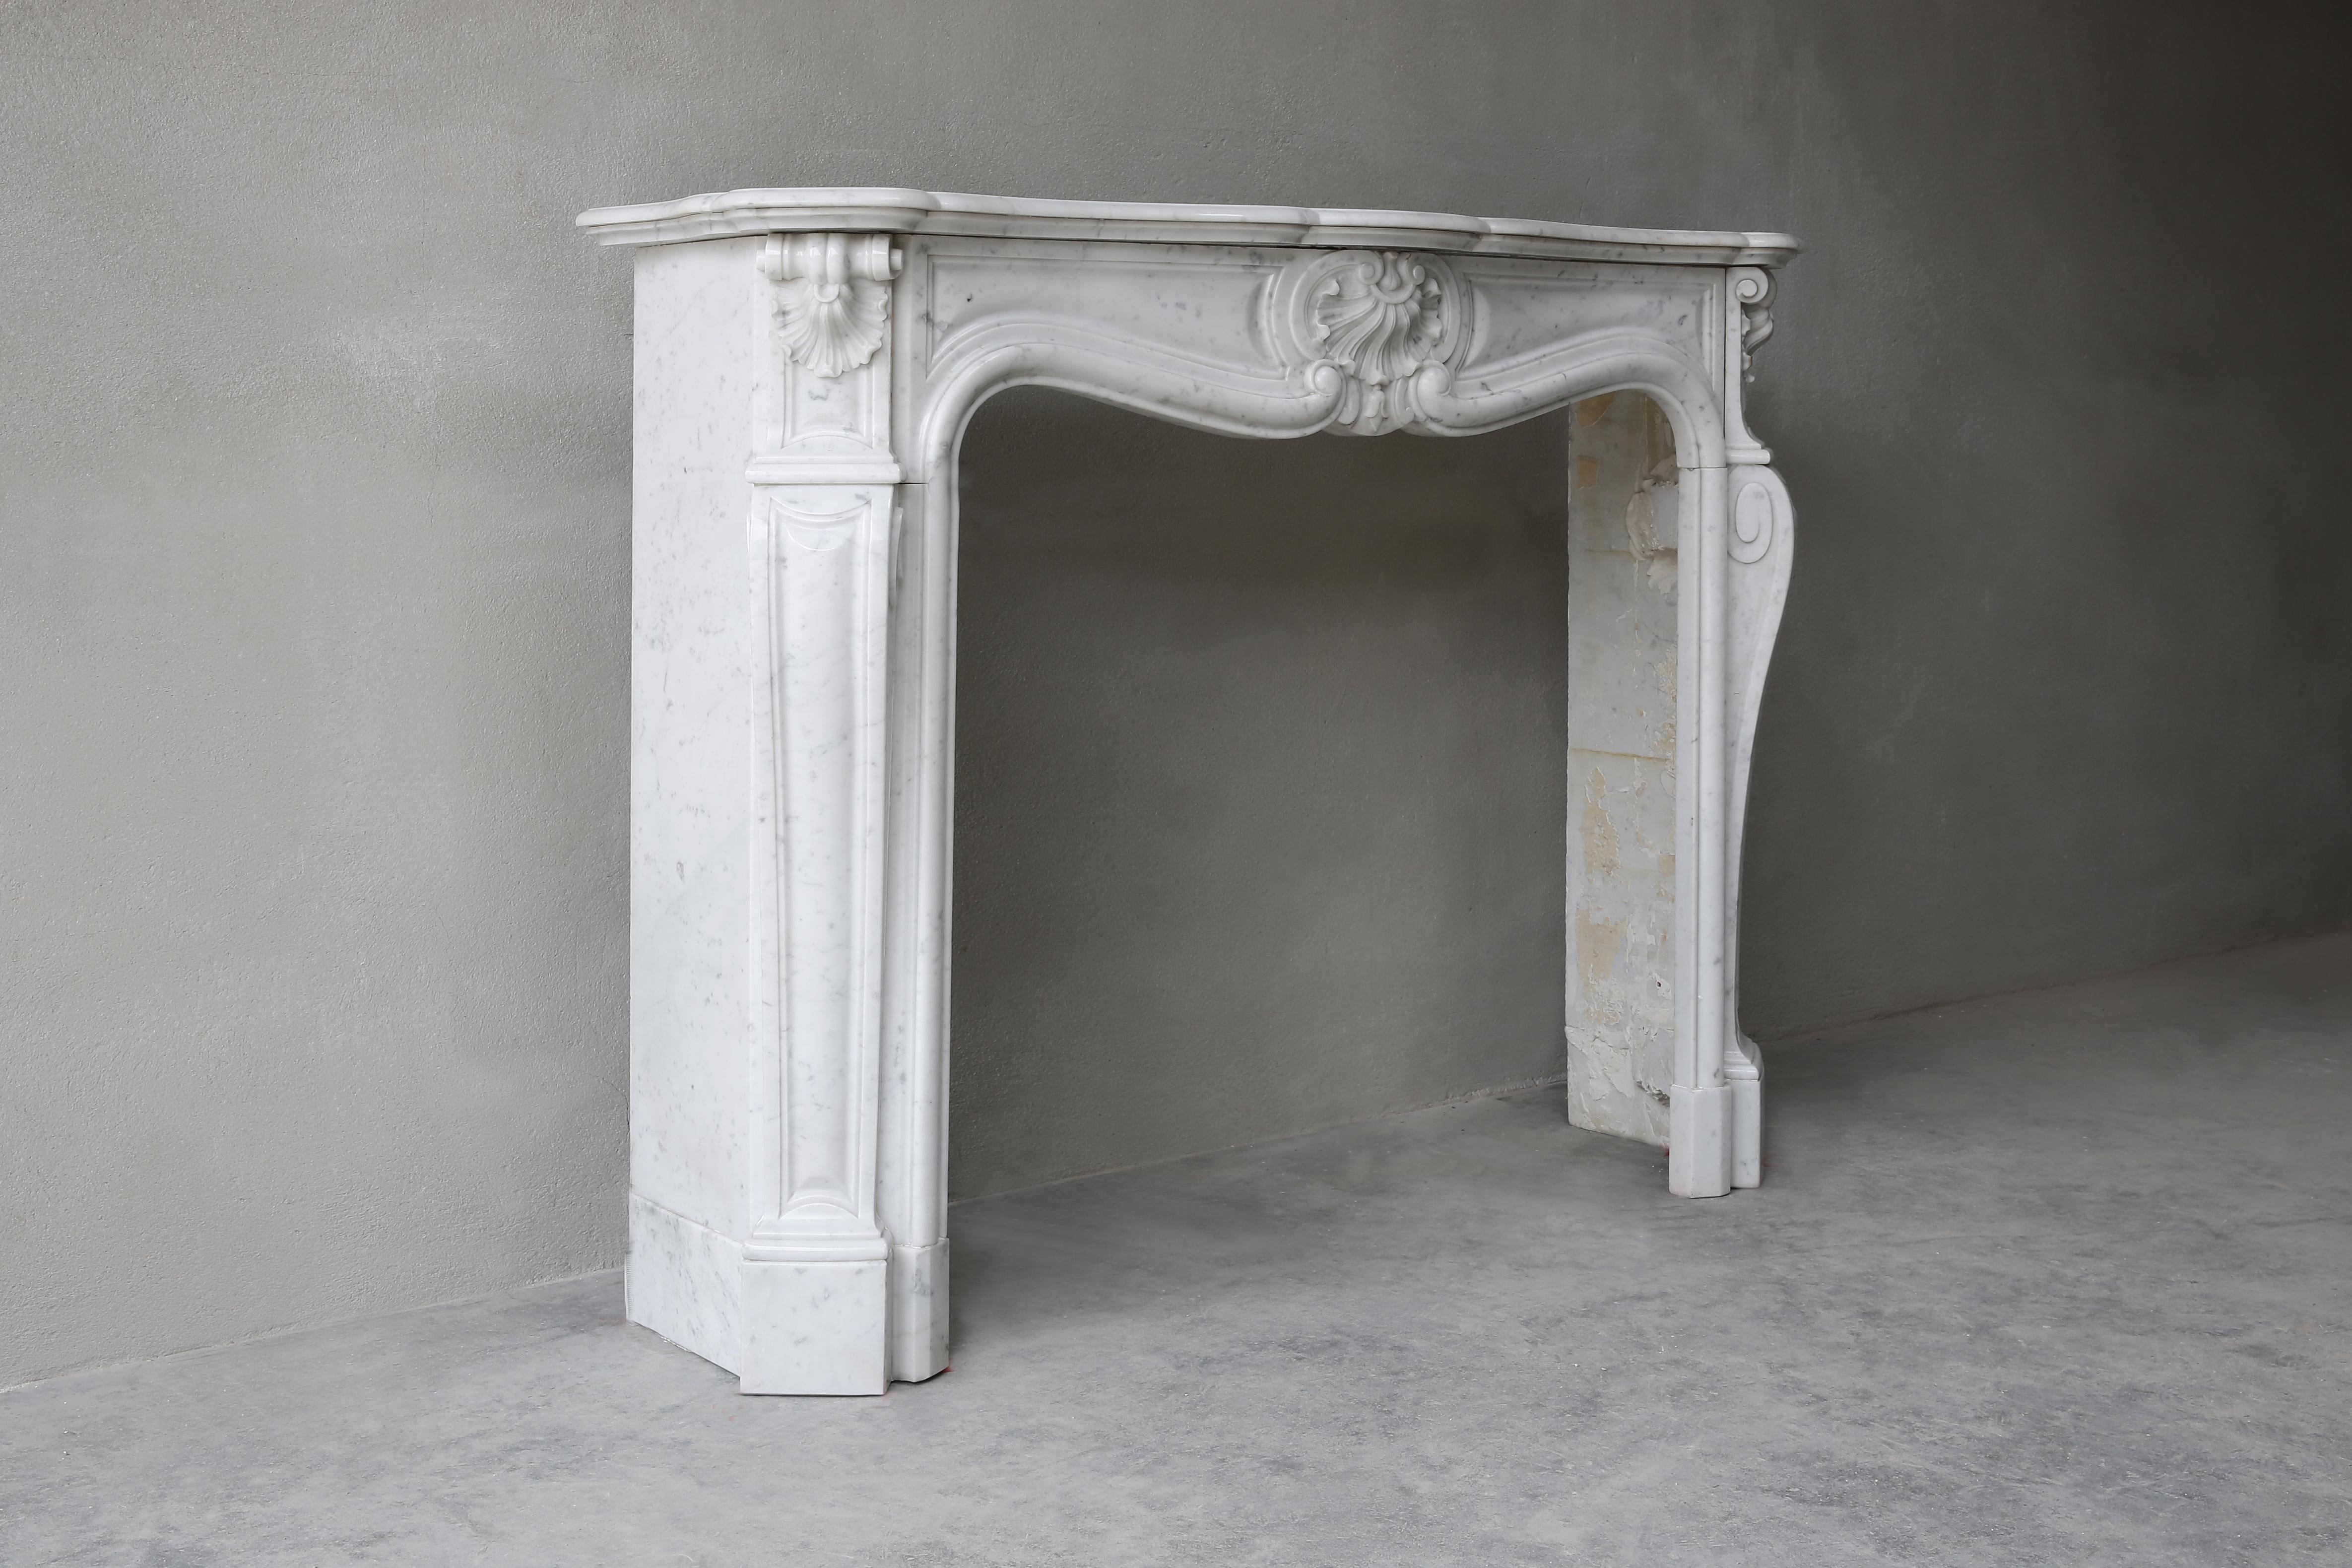 Very nice compact fireplace made of Carrara marble. This antique mantel (fireplace) dates from the 19th century and is in Louis XV style. The mantelpiece is fitted with 'trois scallops' and has beautiful round shapes. The size of this antique